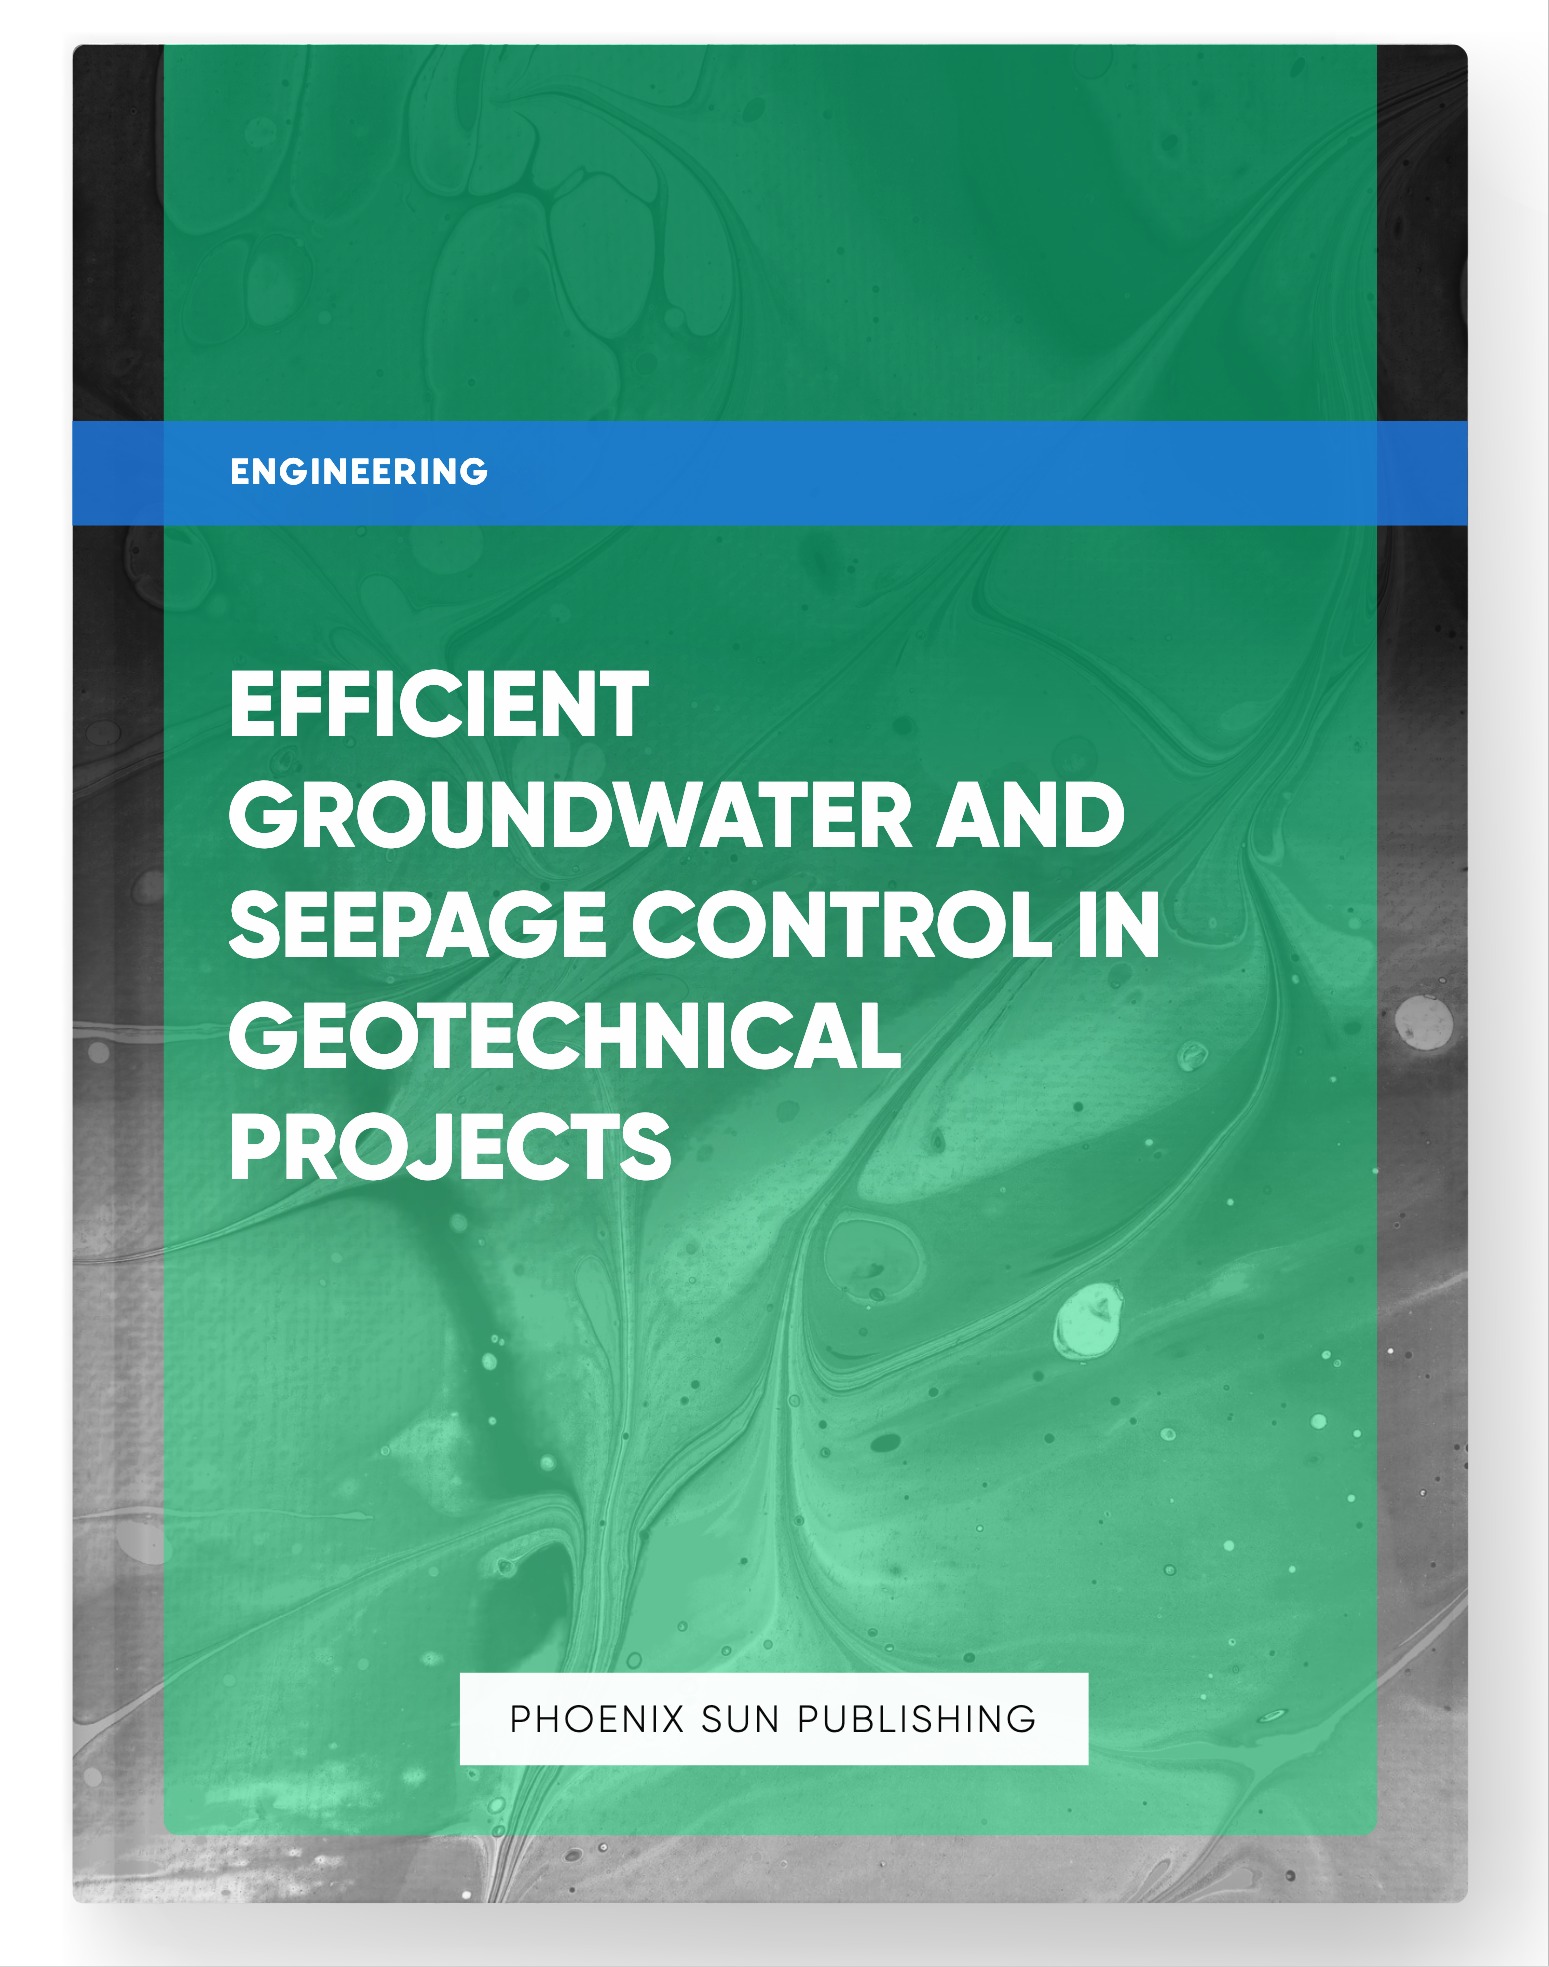 Efficient Groundwater and Seepage Control in Geotechnical Projects